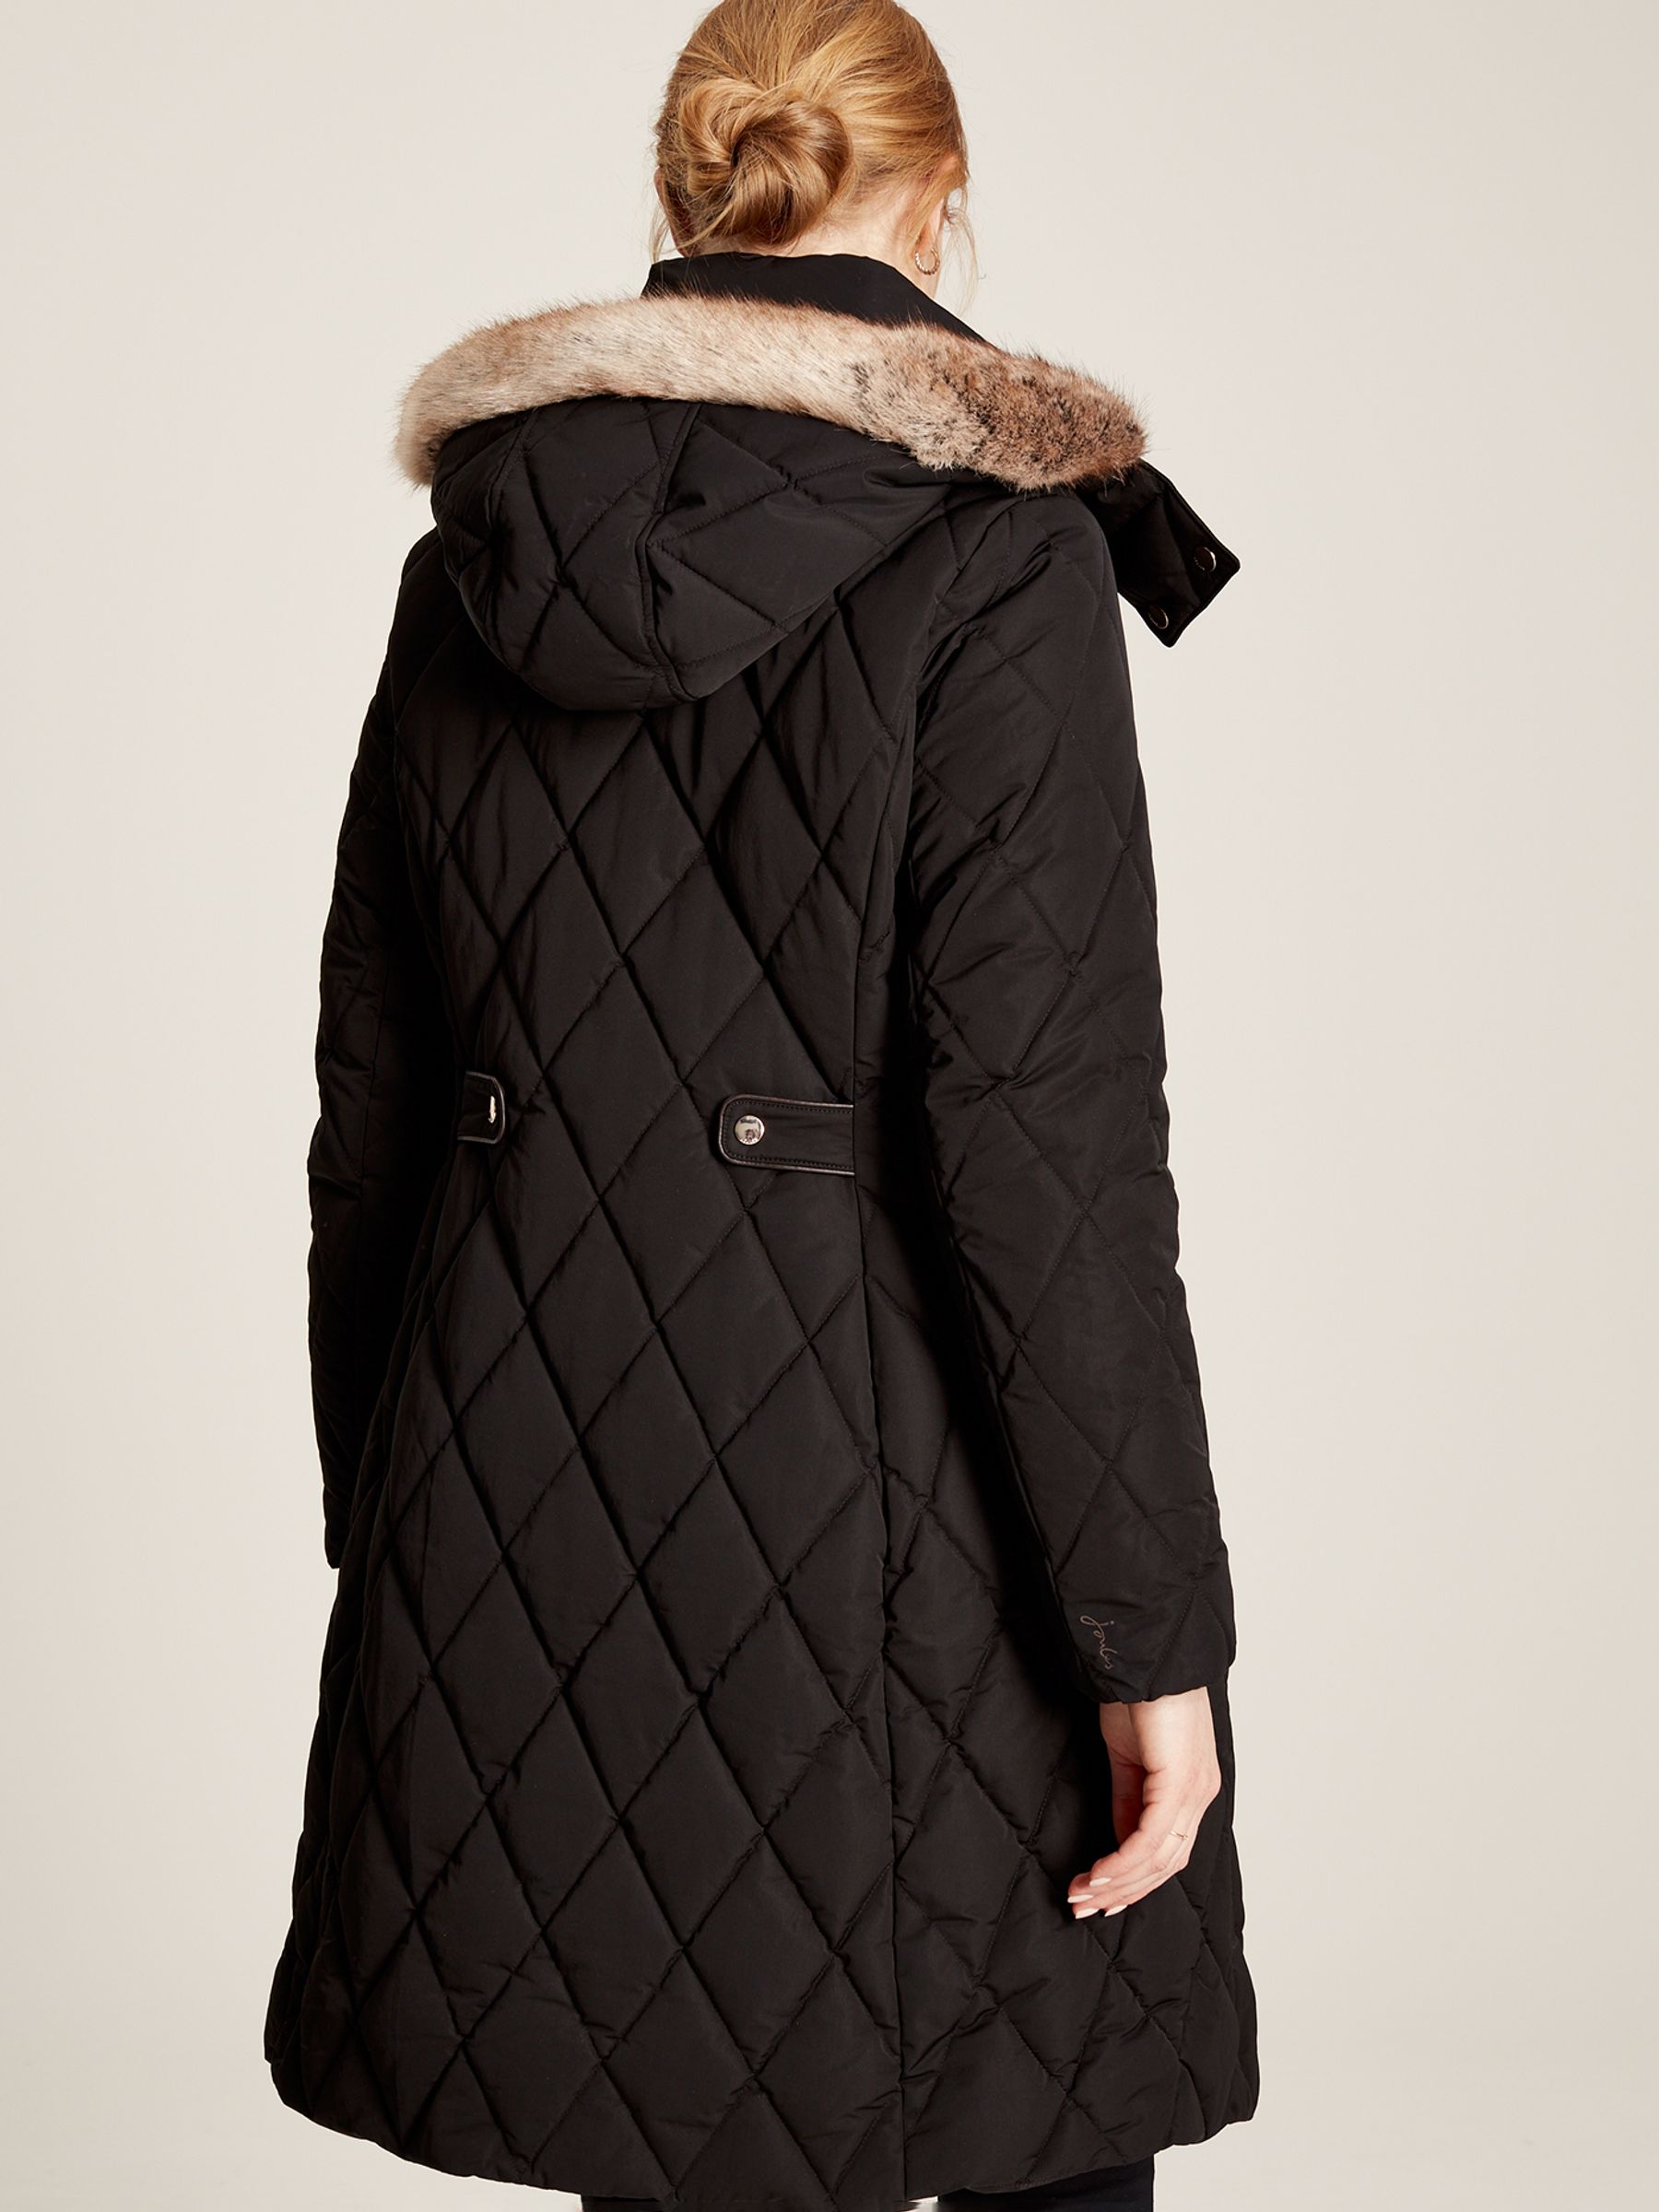 Buy Uppingham Black Diamond Quilted Trail Jacket from the Joules online ...